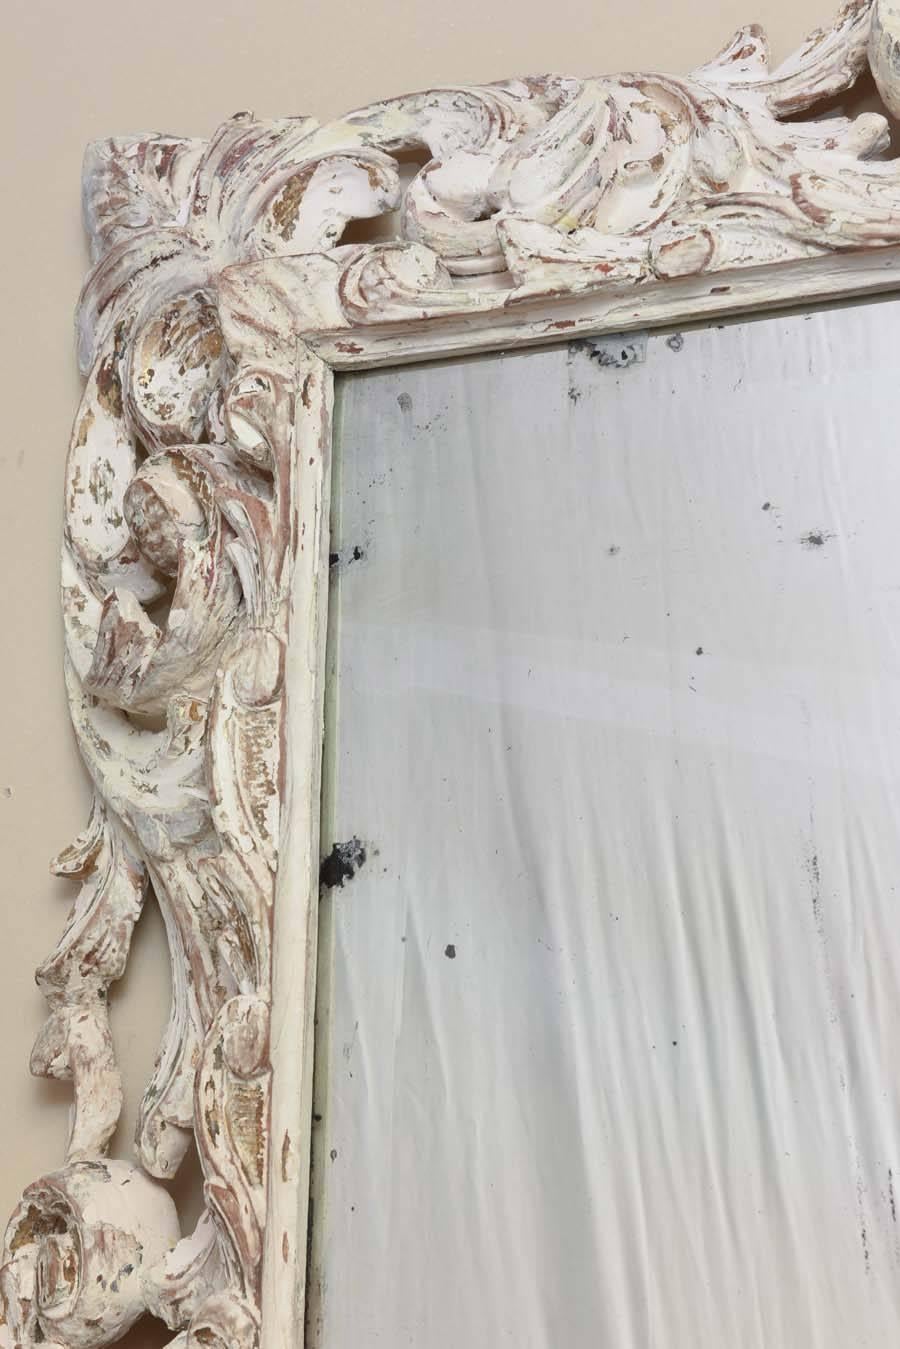 Baroque Revival 18th Century Foliate-Carved Wood Mirror Frame For Sale